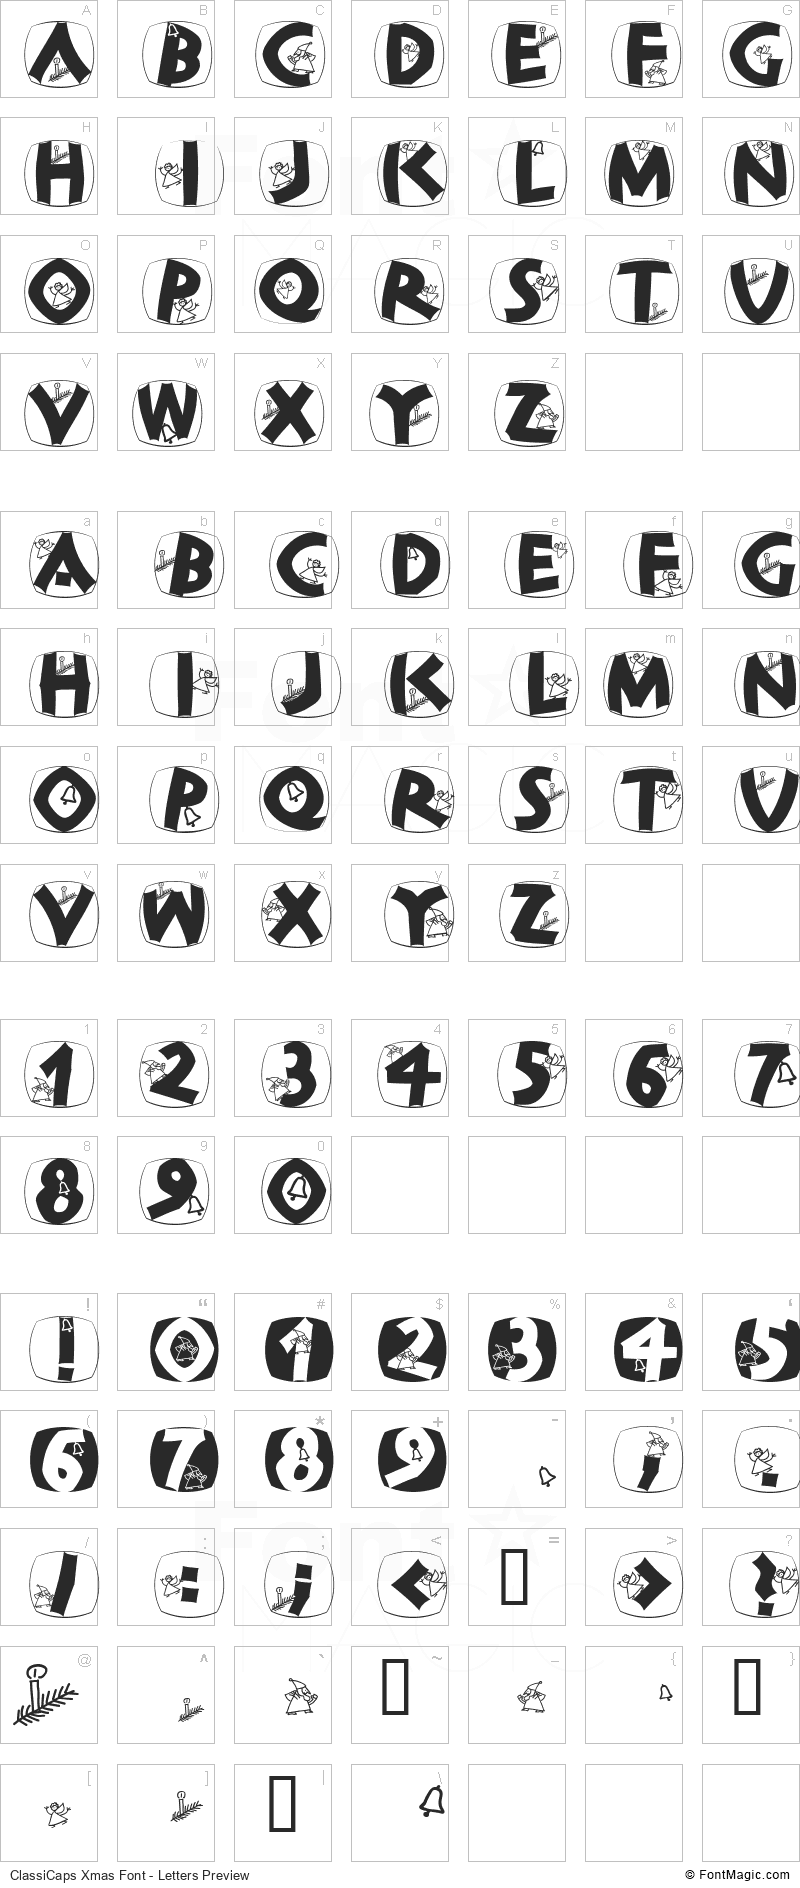 ClassiCaps Xmas Font - All Latters Preview Chart